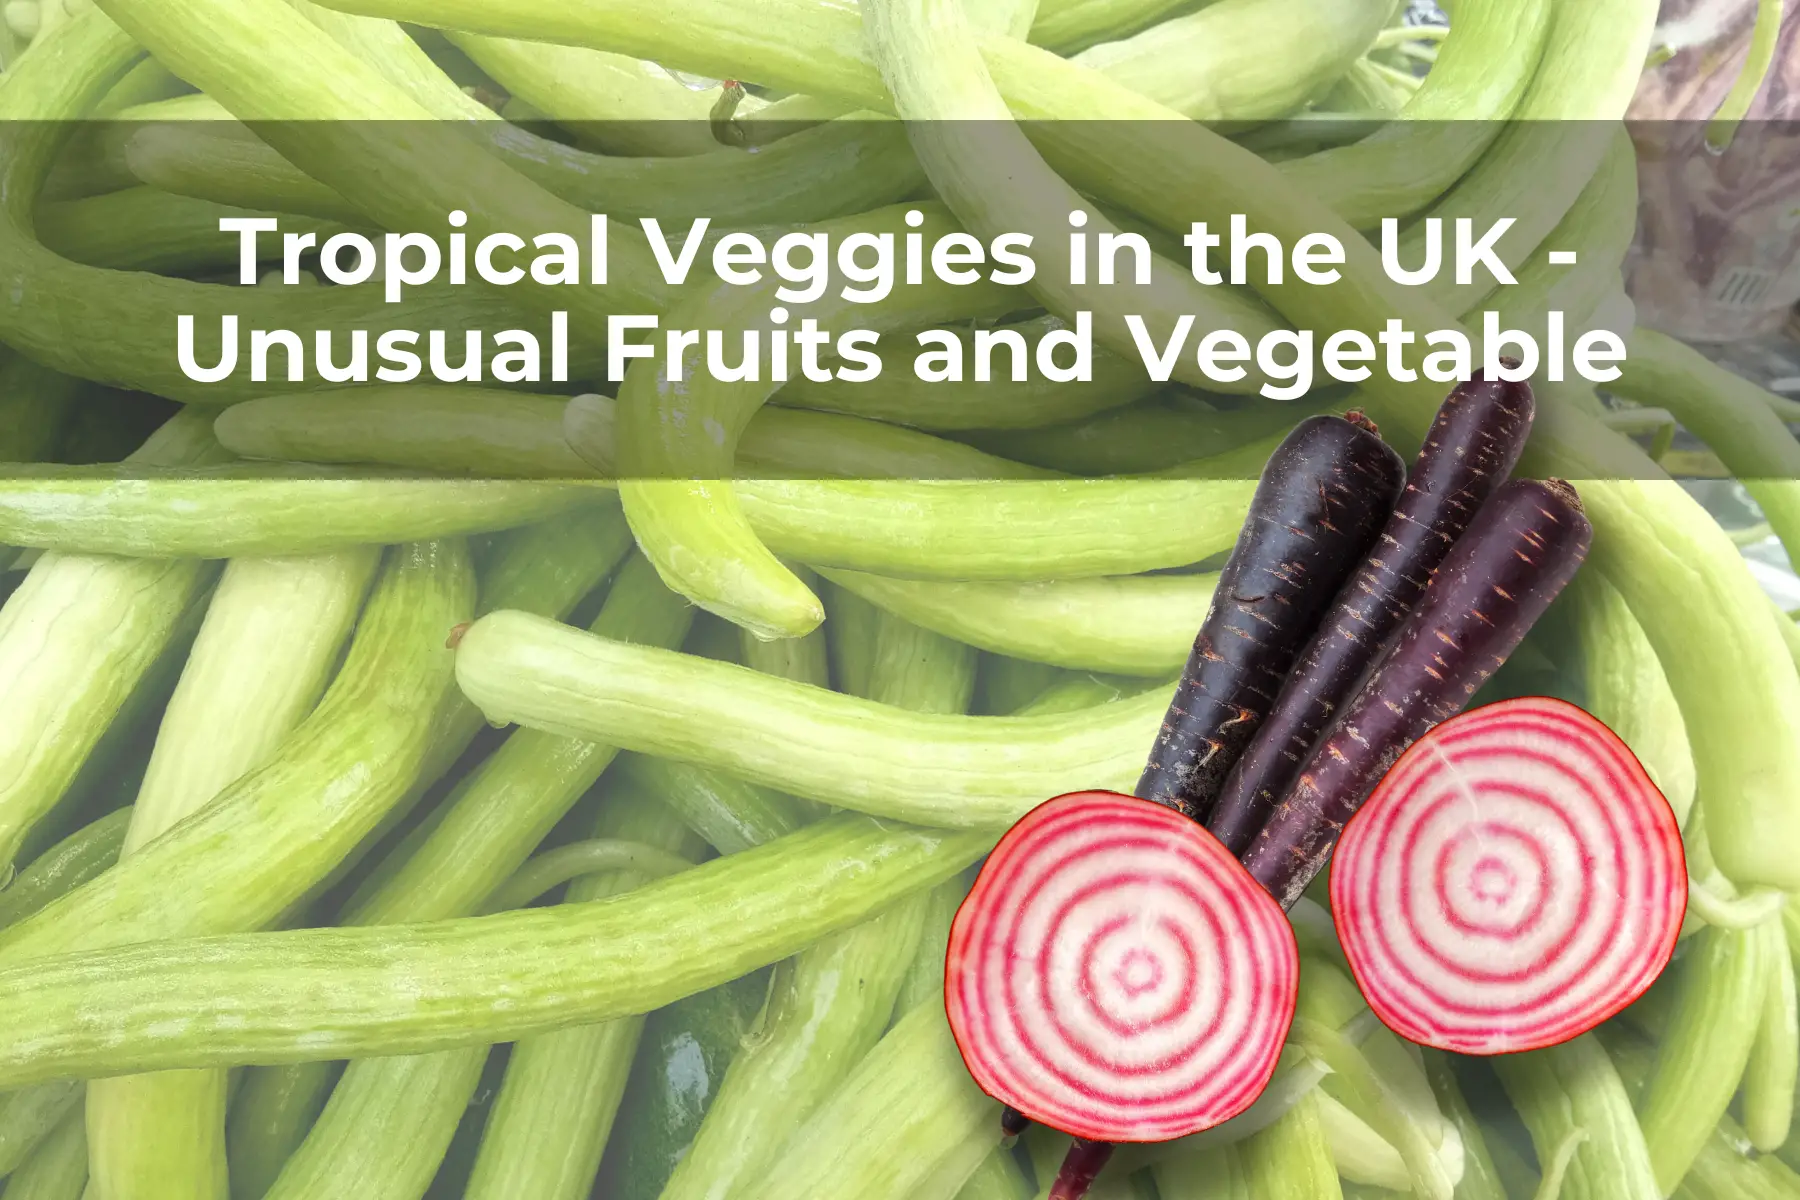 Tropical Veggies in the UK - Unusual Fruits and Vegetable